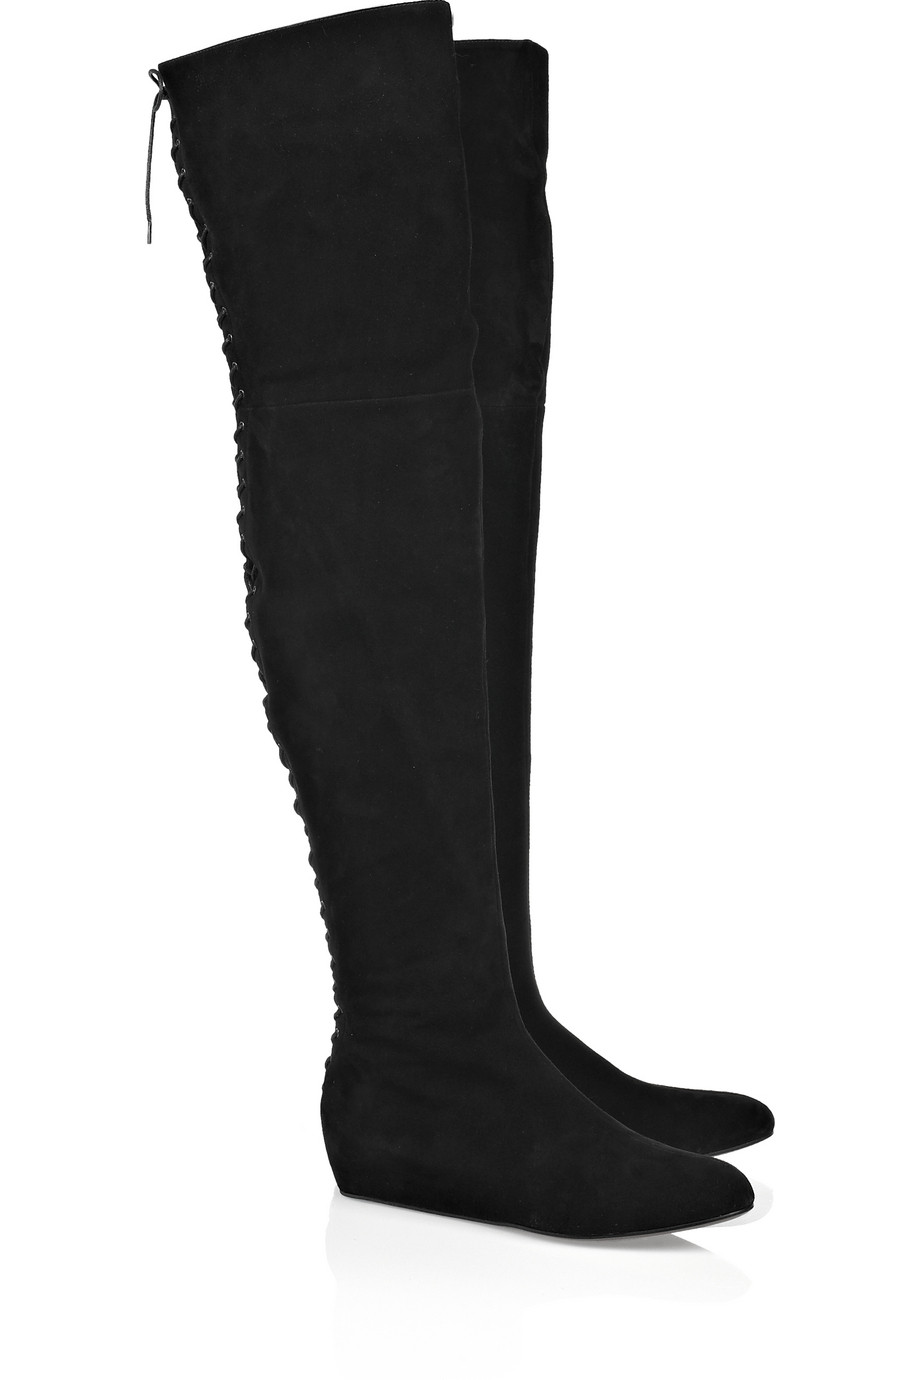 Alaïa Lace-up Thigh-high Suede Boots in Black | Lyst